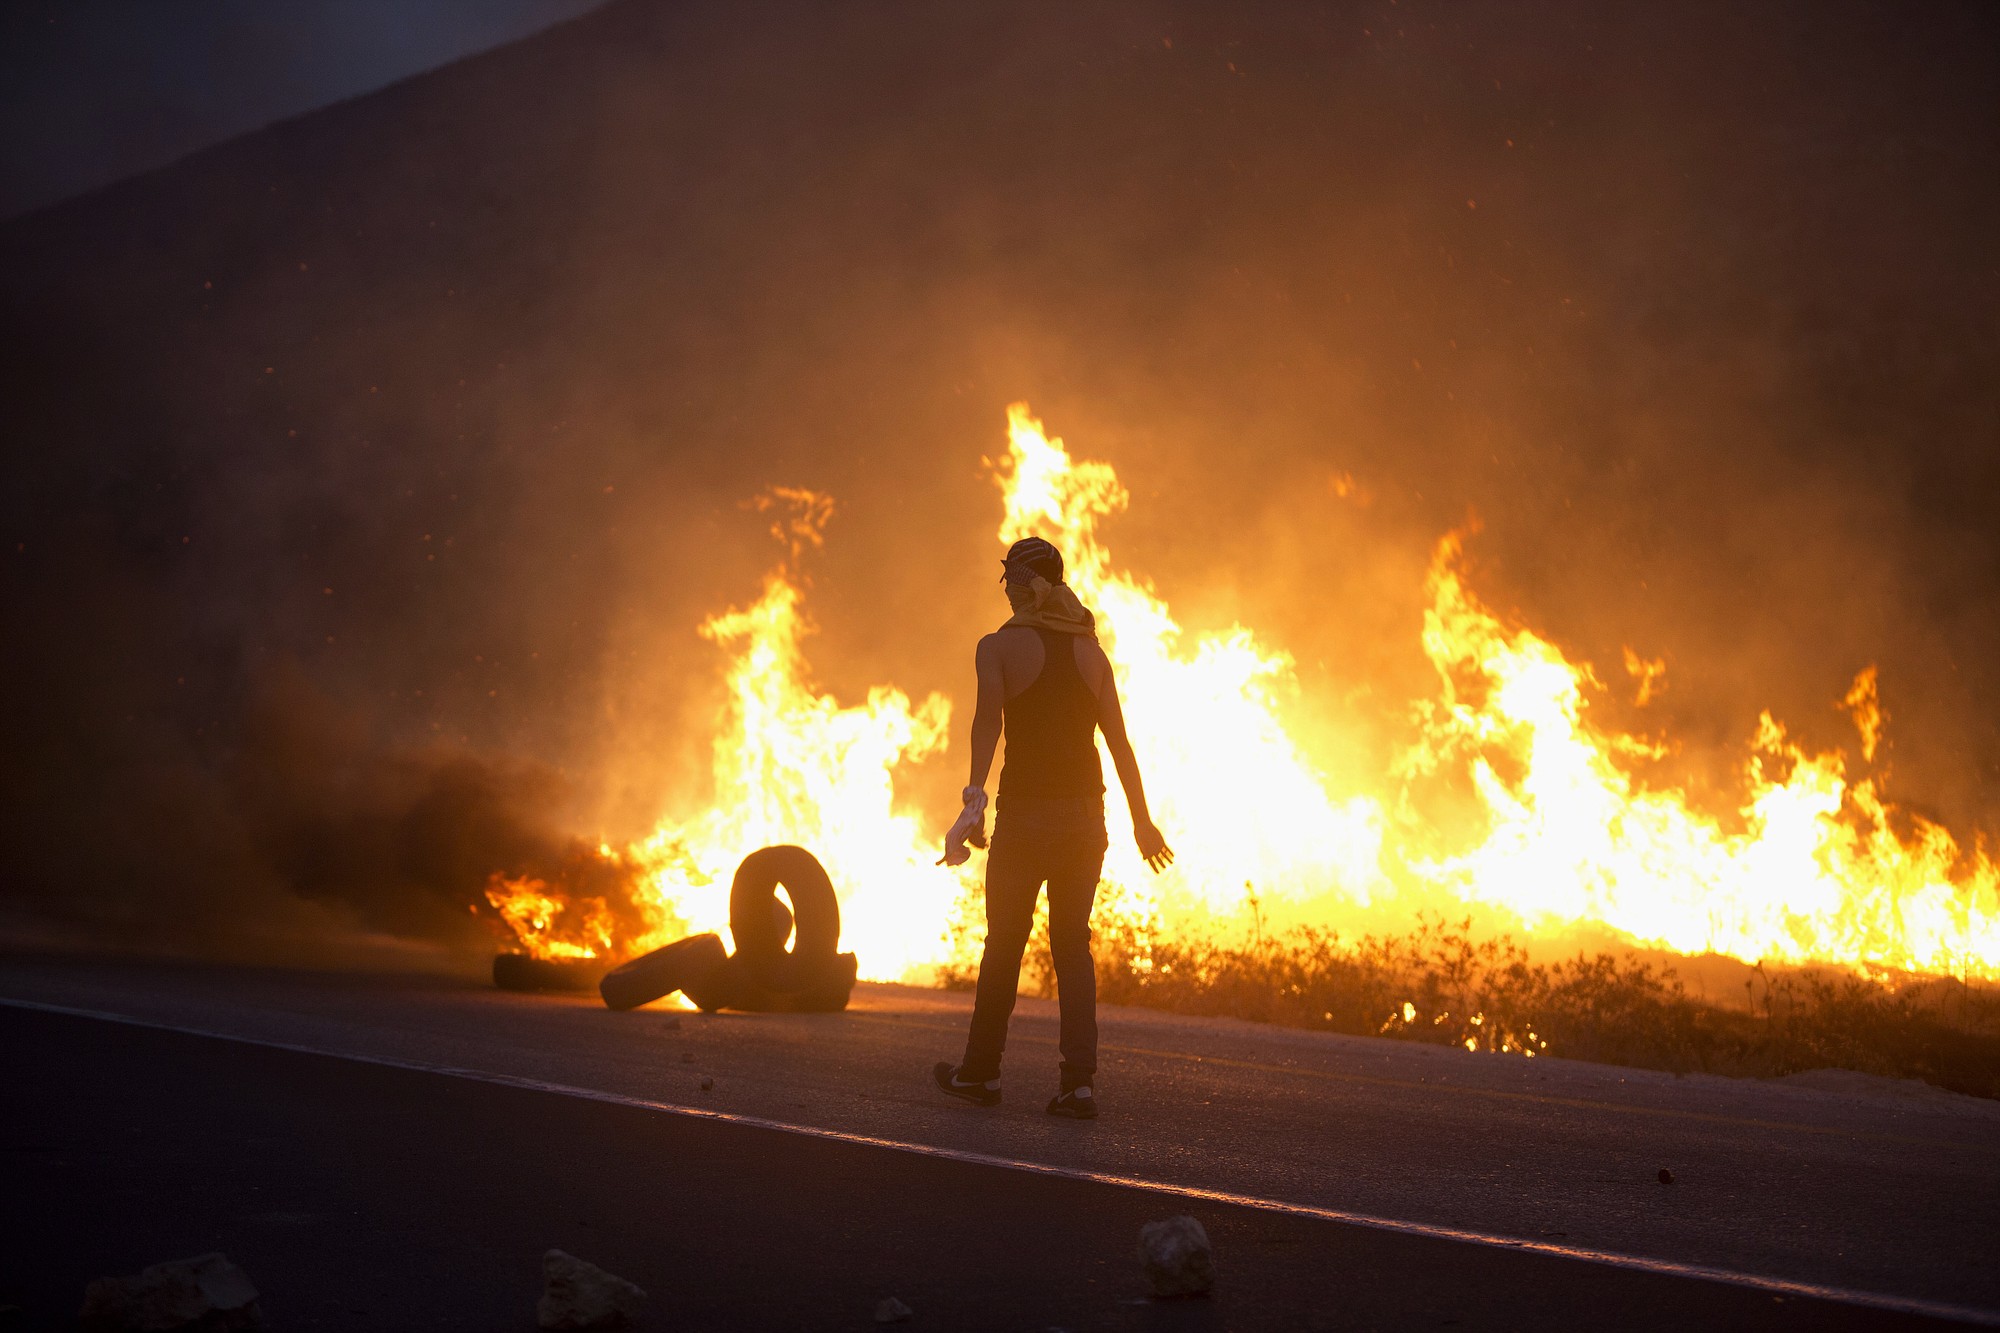 A Palestinian demonstrator burns tires in clashes with Israeli soldiers Sunday near the West Bank city of Nablus.